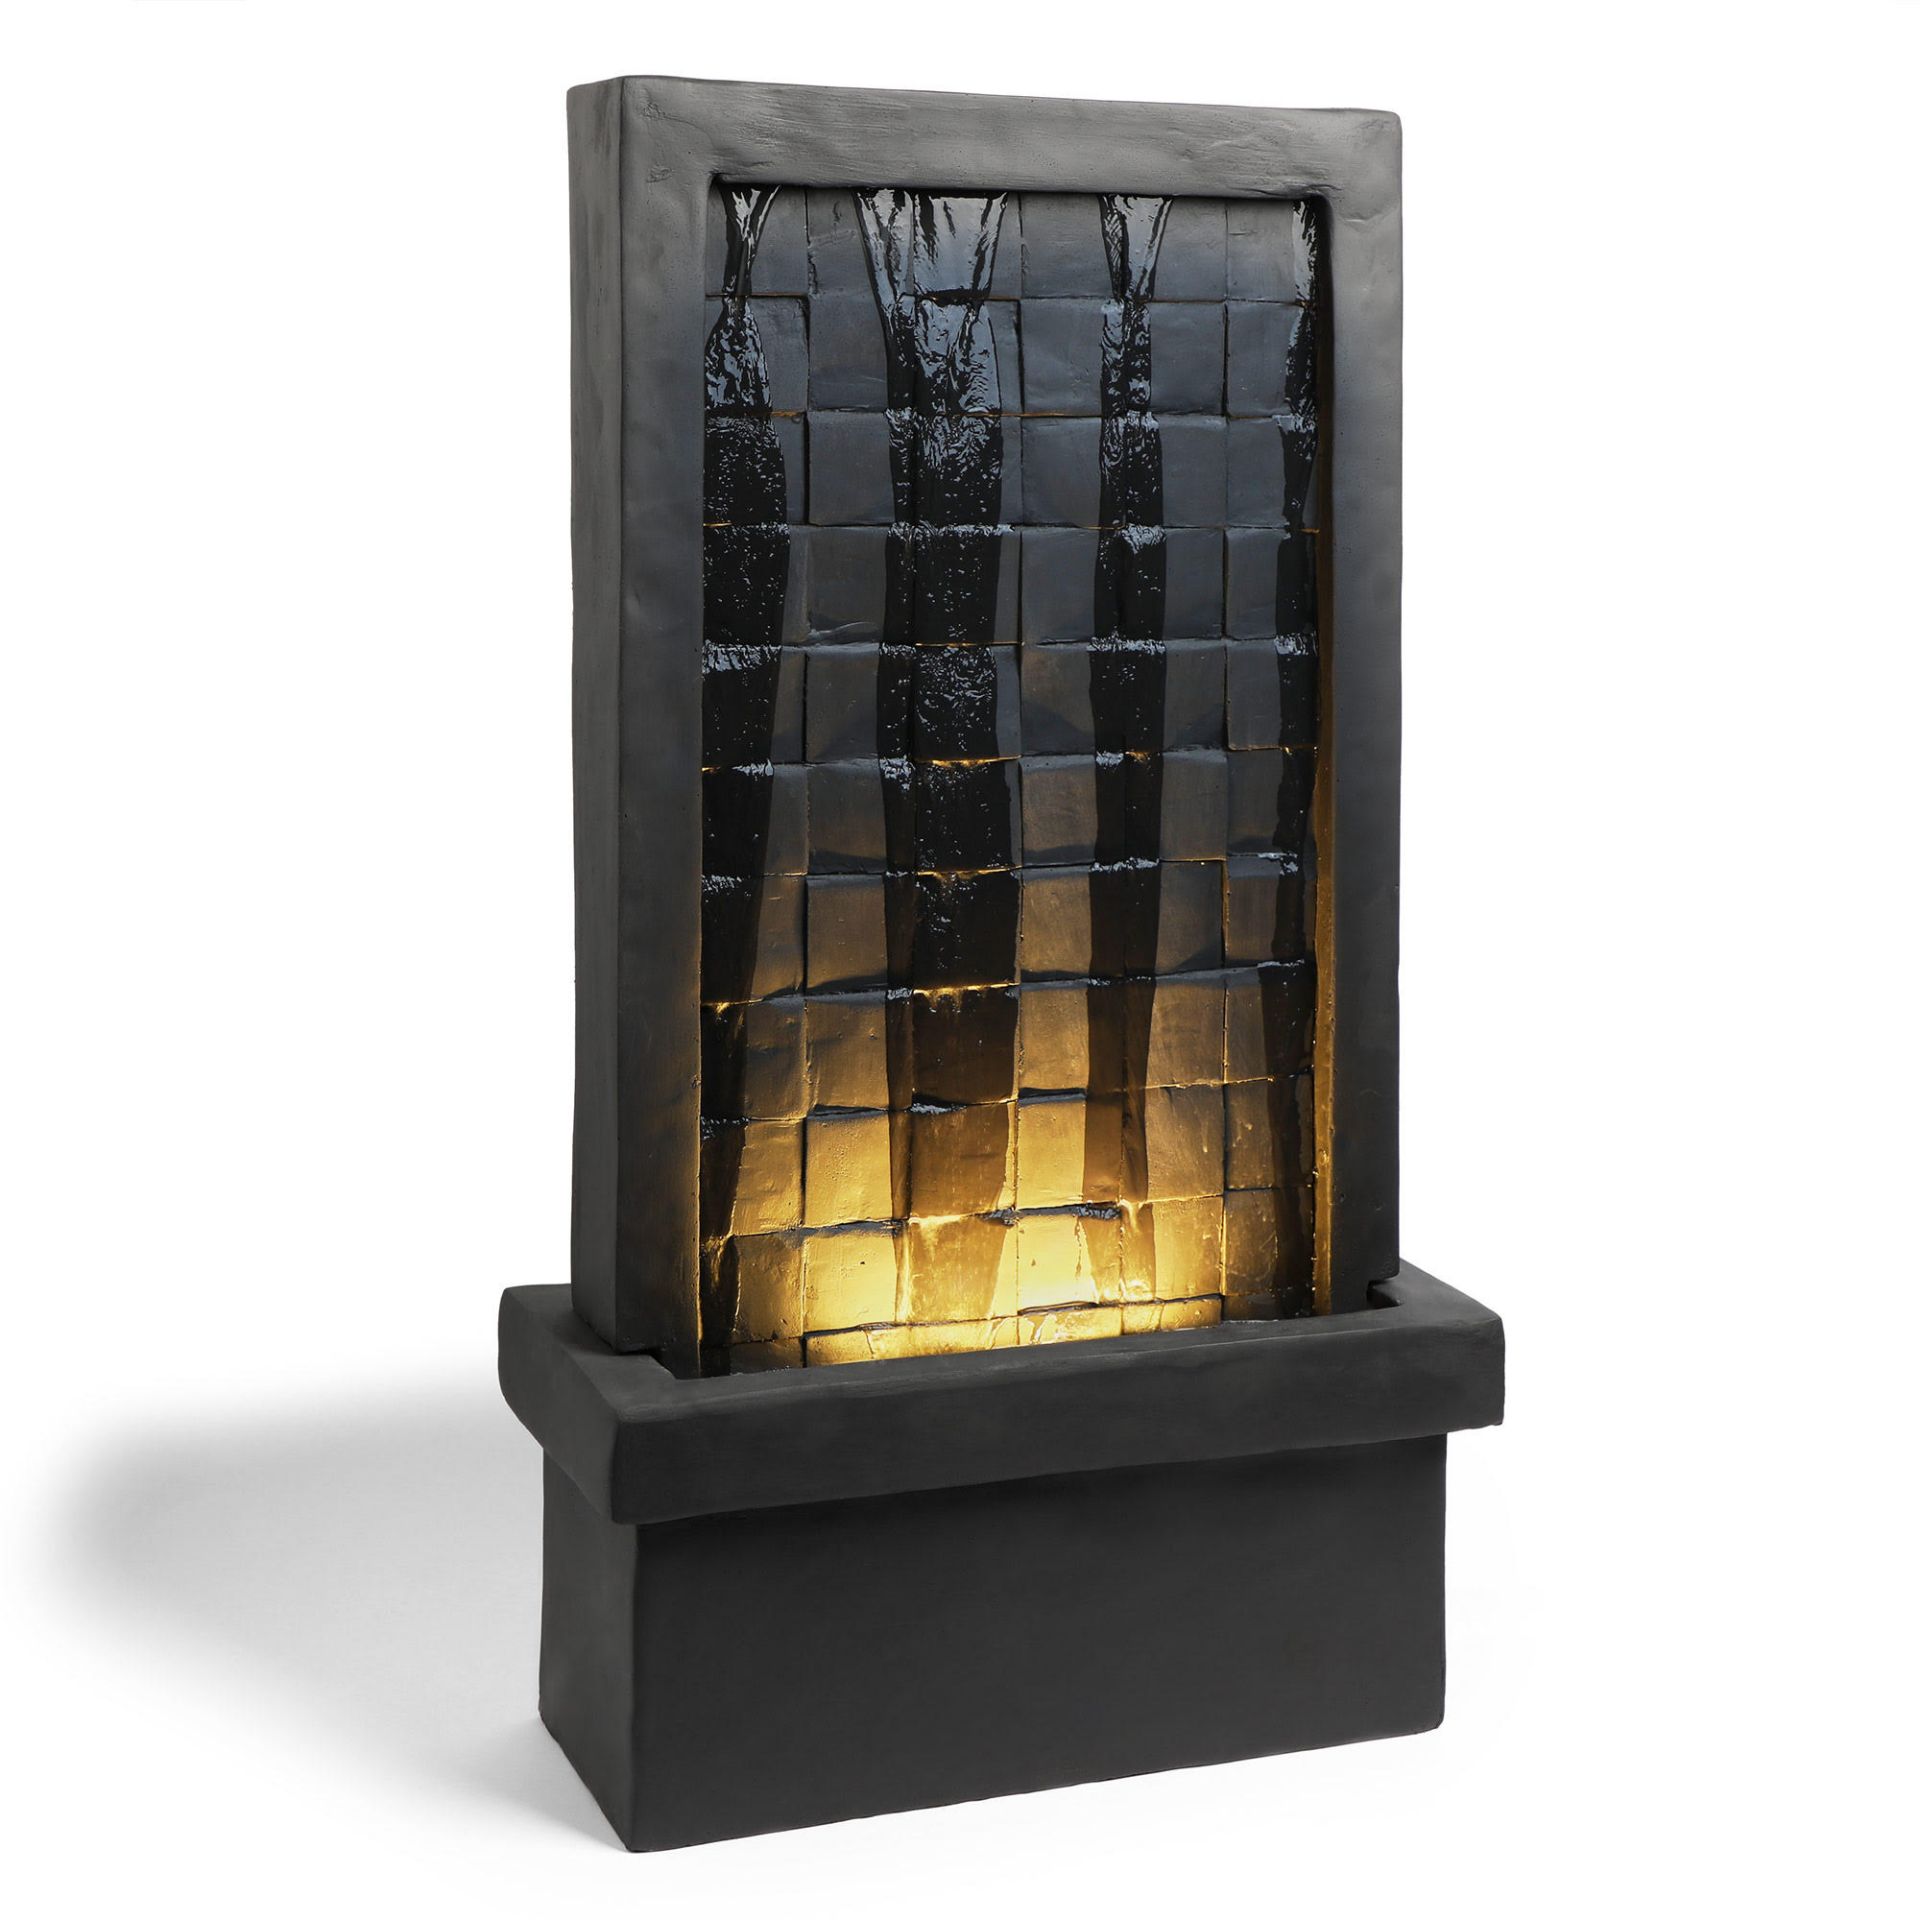 New & Boxed Tiled Waterfall Water Feature - Tall LED Wall Lit Cascading Water Fountain. RRP £349.99. - Image 5 of 6